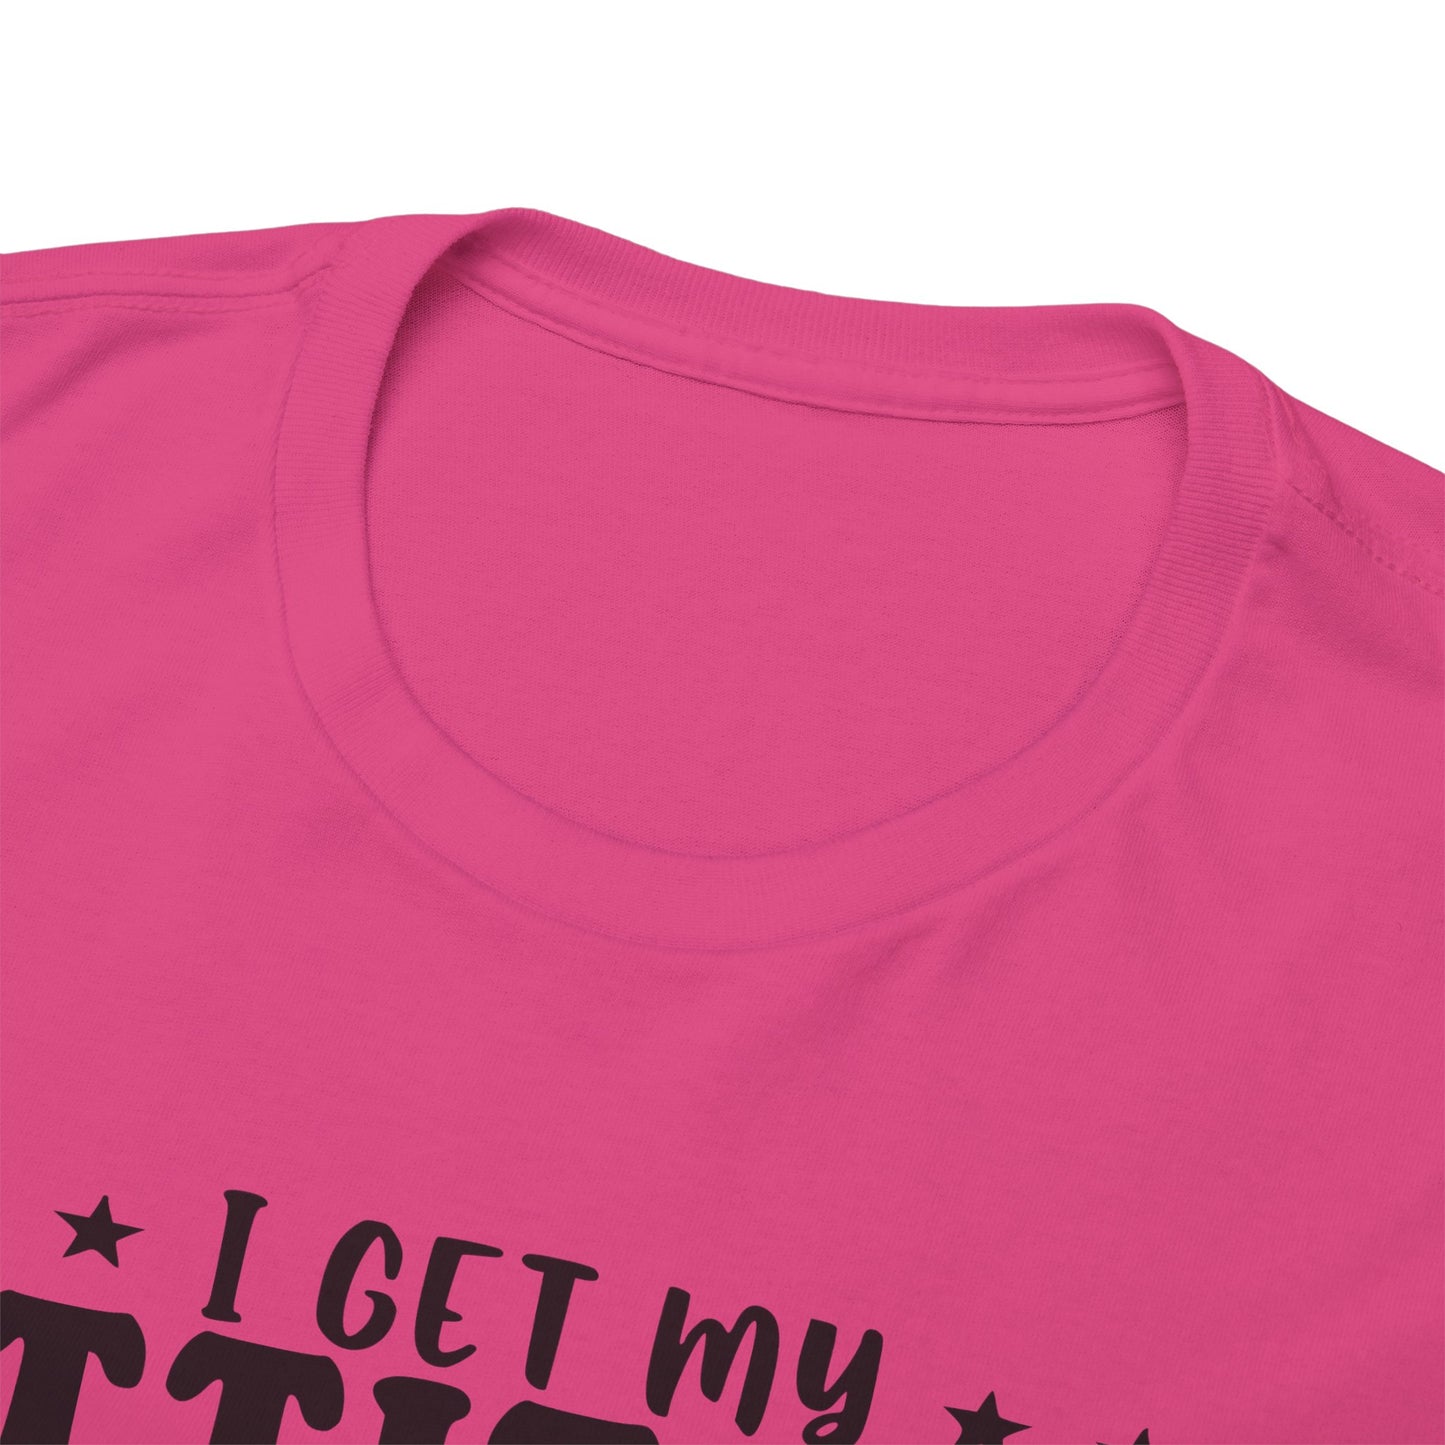 "My Frickin Awesome Mom" attitude tee, a perfect gift to show appreciation for moms with a sense of humor.